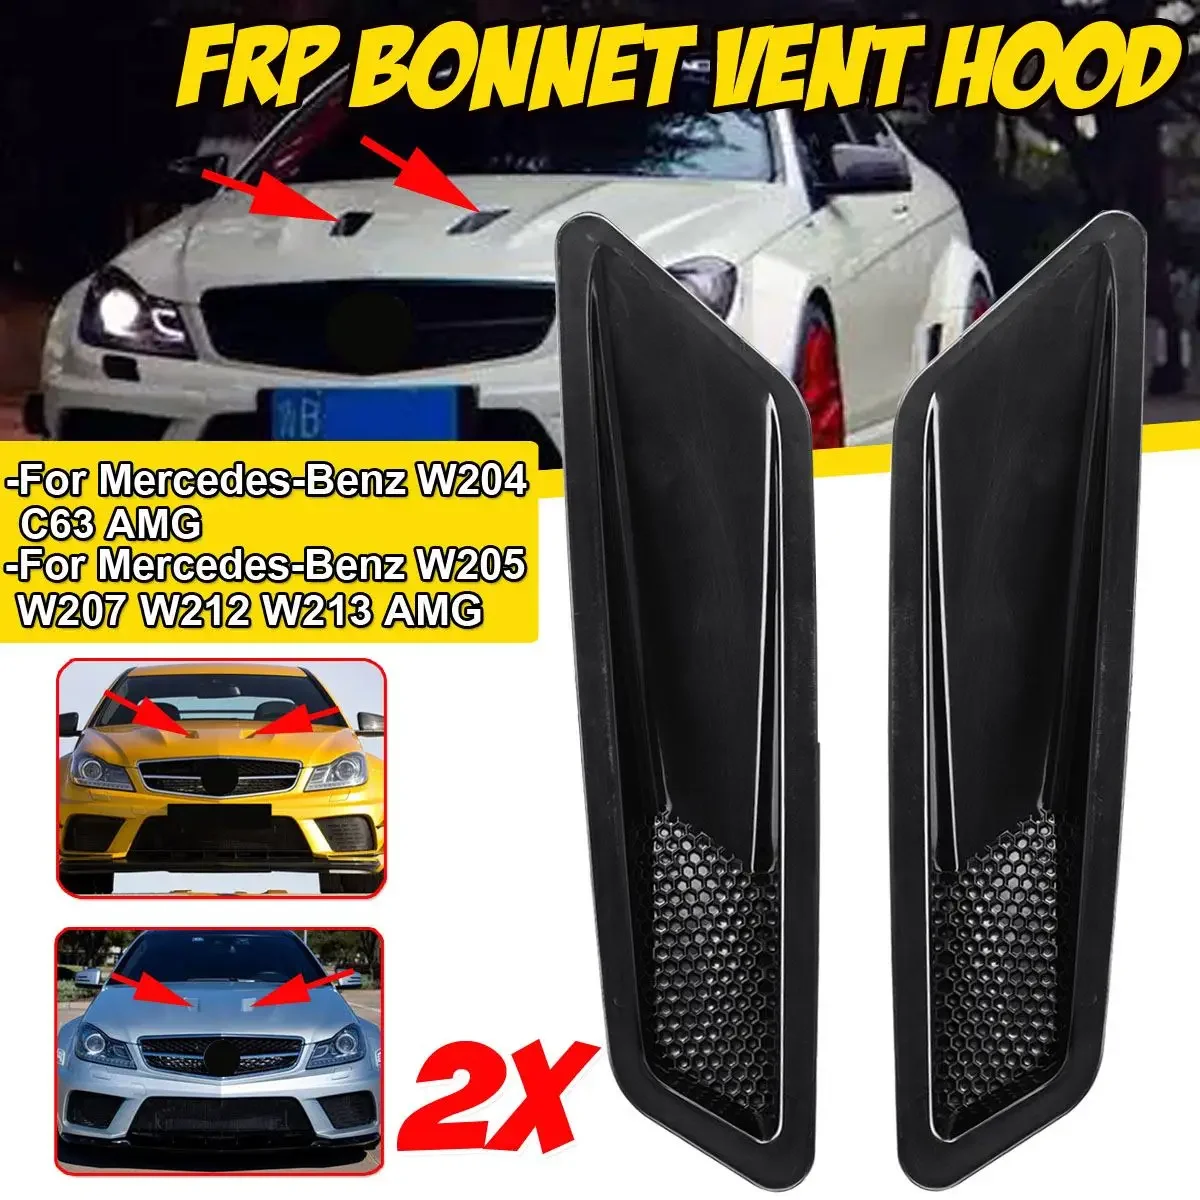 

New 2X Car Air Hood Vent Air Intake Scoop Bonnet Louvers Cover For Mercedes For Benz W204 C63 W205 W207 W212 W213 For AMG 2/4 Dr